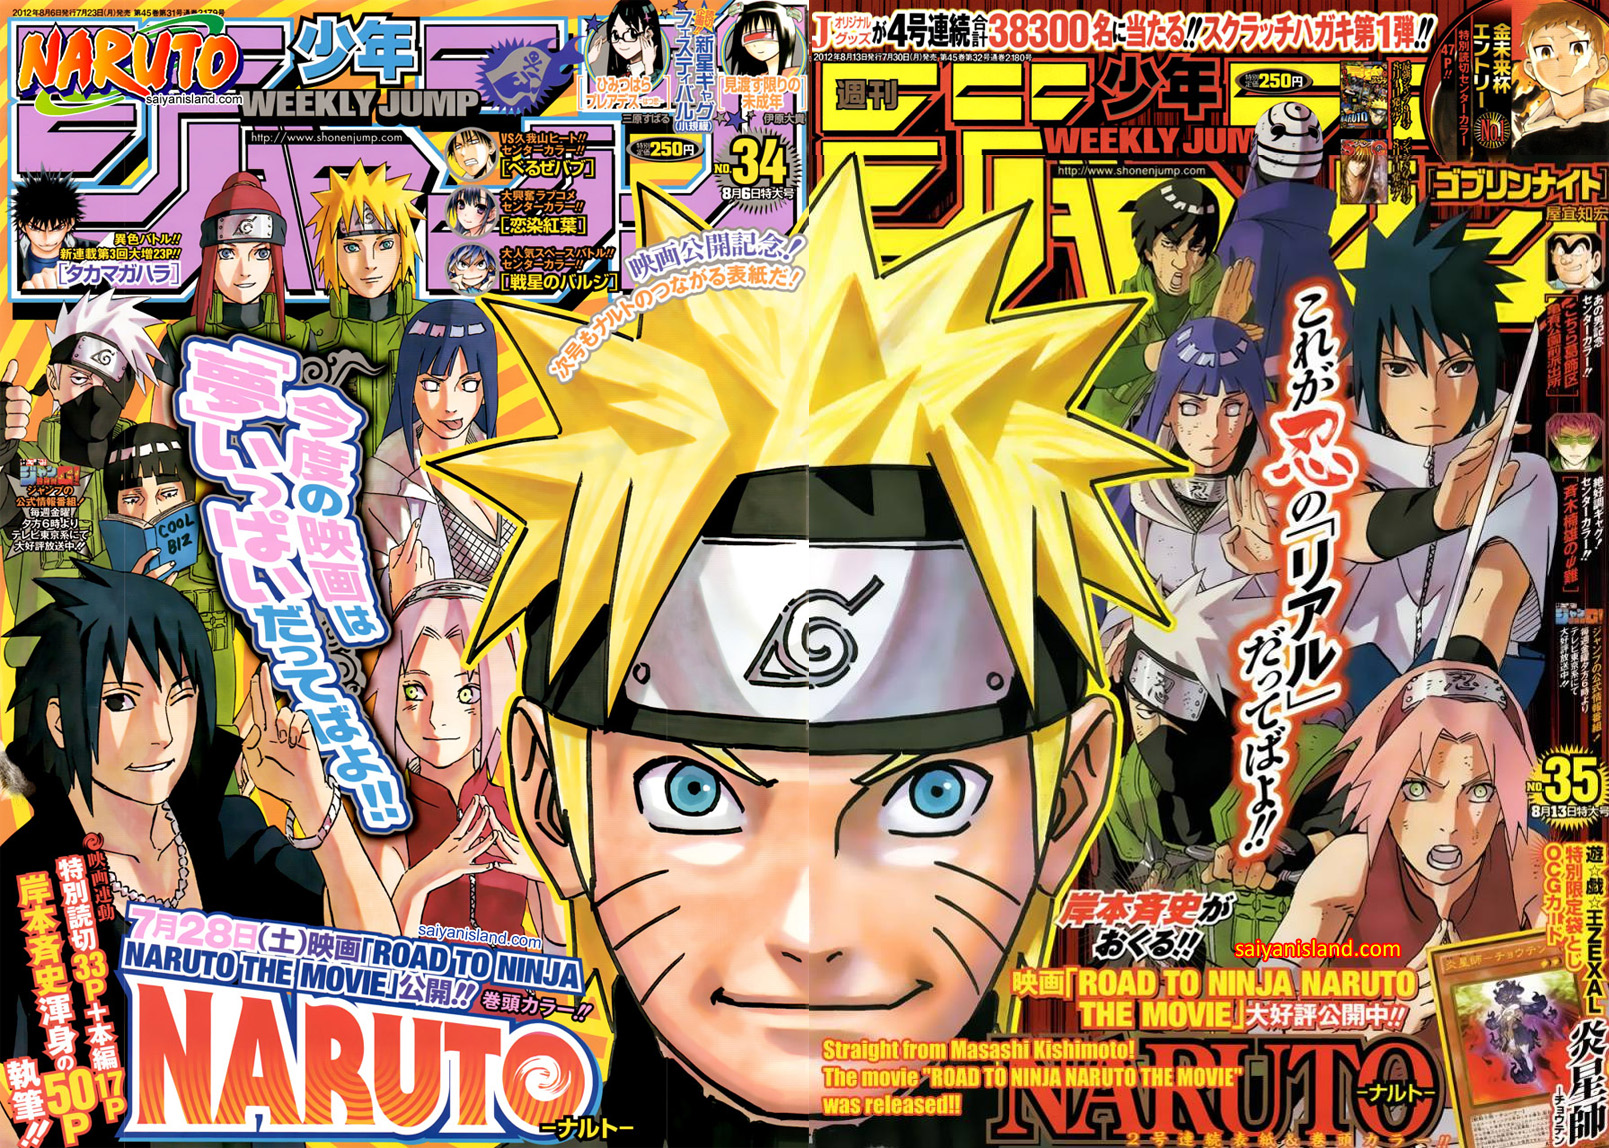 Mag Talk - Weekly Shonen Jump 2019 - Discussion and TOC Talk